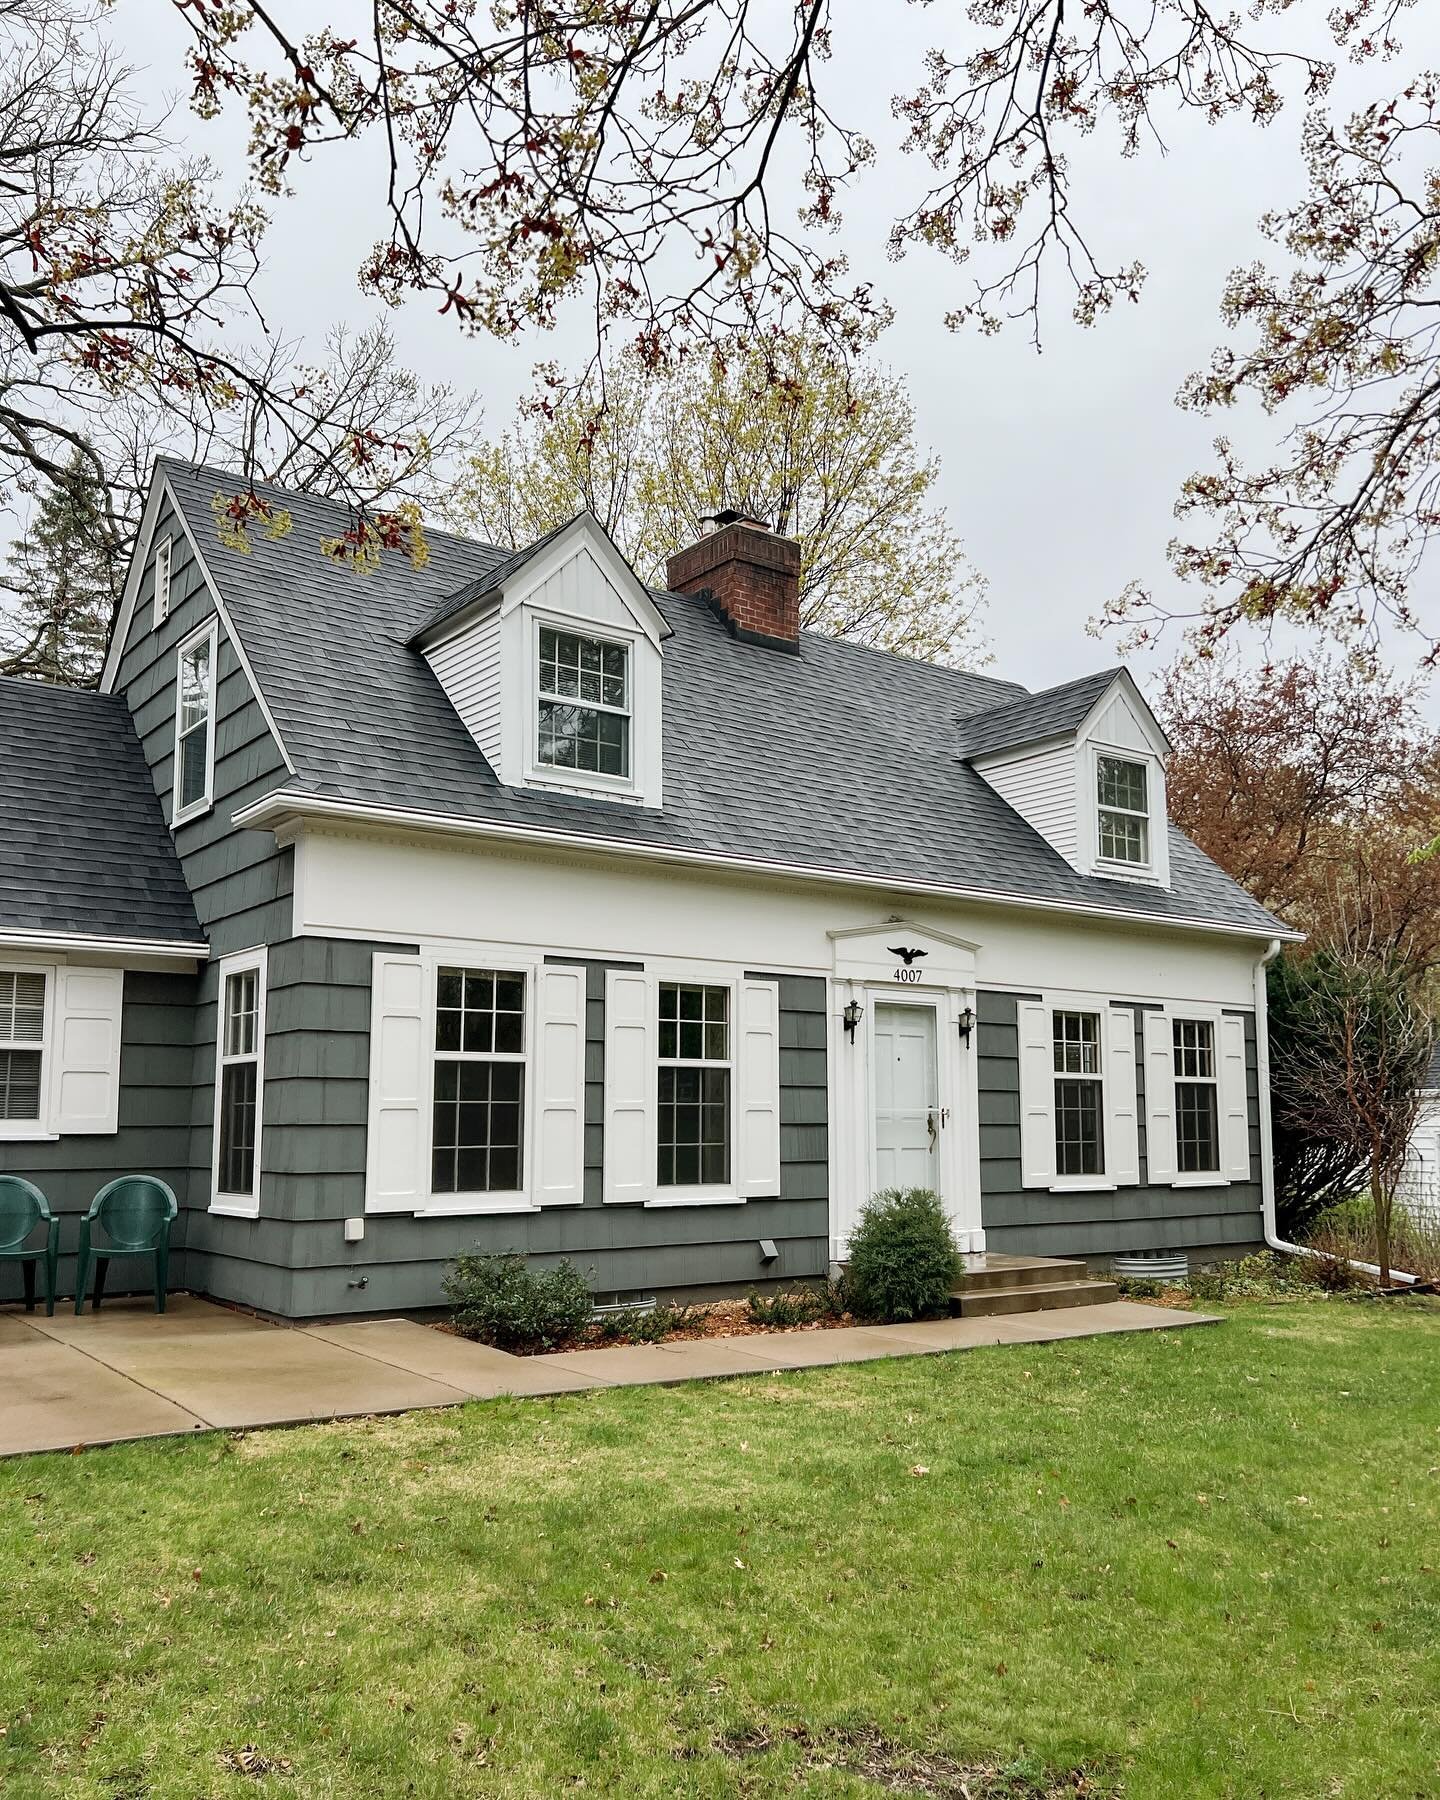 Charming New England style Cape Cod in the Lake Forest Neighborhood, blocks from Cedar Lake. 

Interested in finding your own home to love? Fill out my &lsquo;buy with me&rsquo; contact form in my profile and we&rsquo;ll get started 🏡

Built in 1947